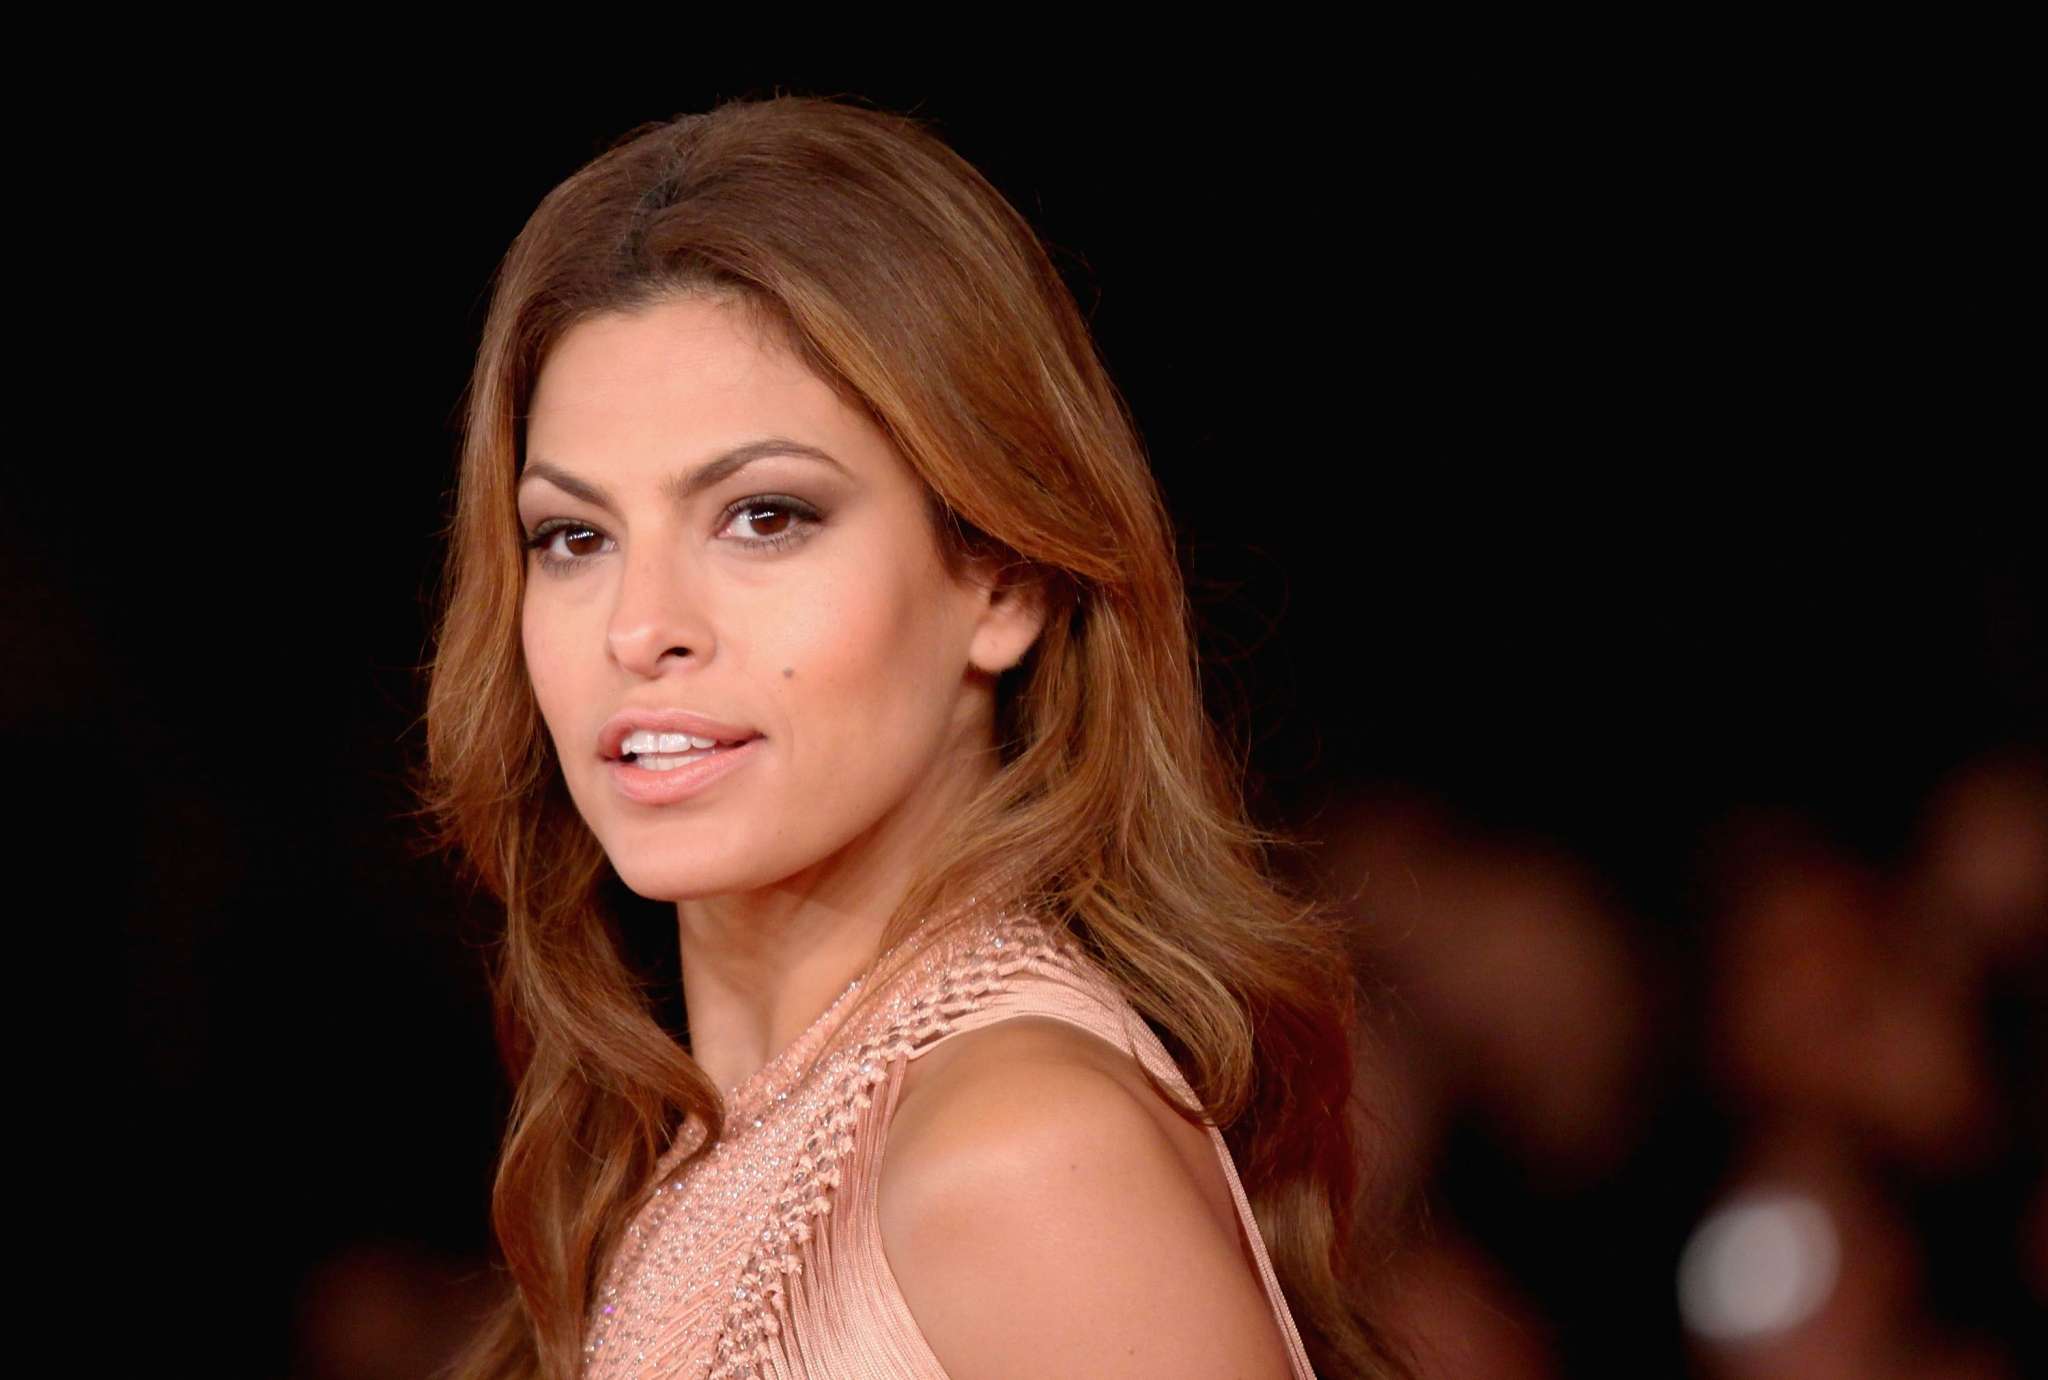 ”eva-mendes-stuns-in-vacation-pictures-from-greece”